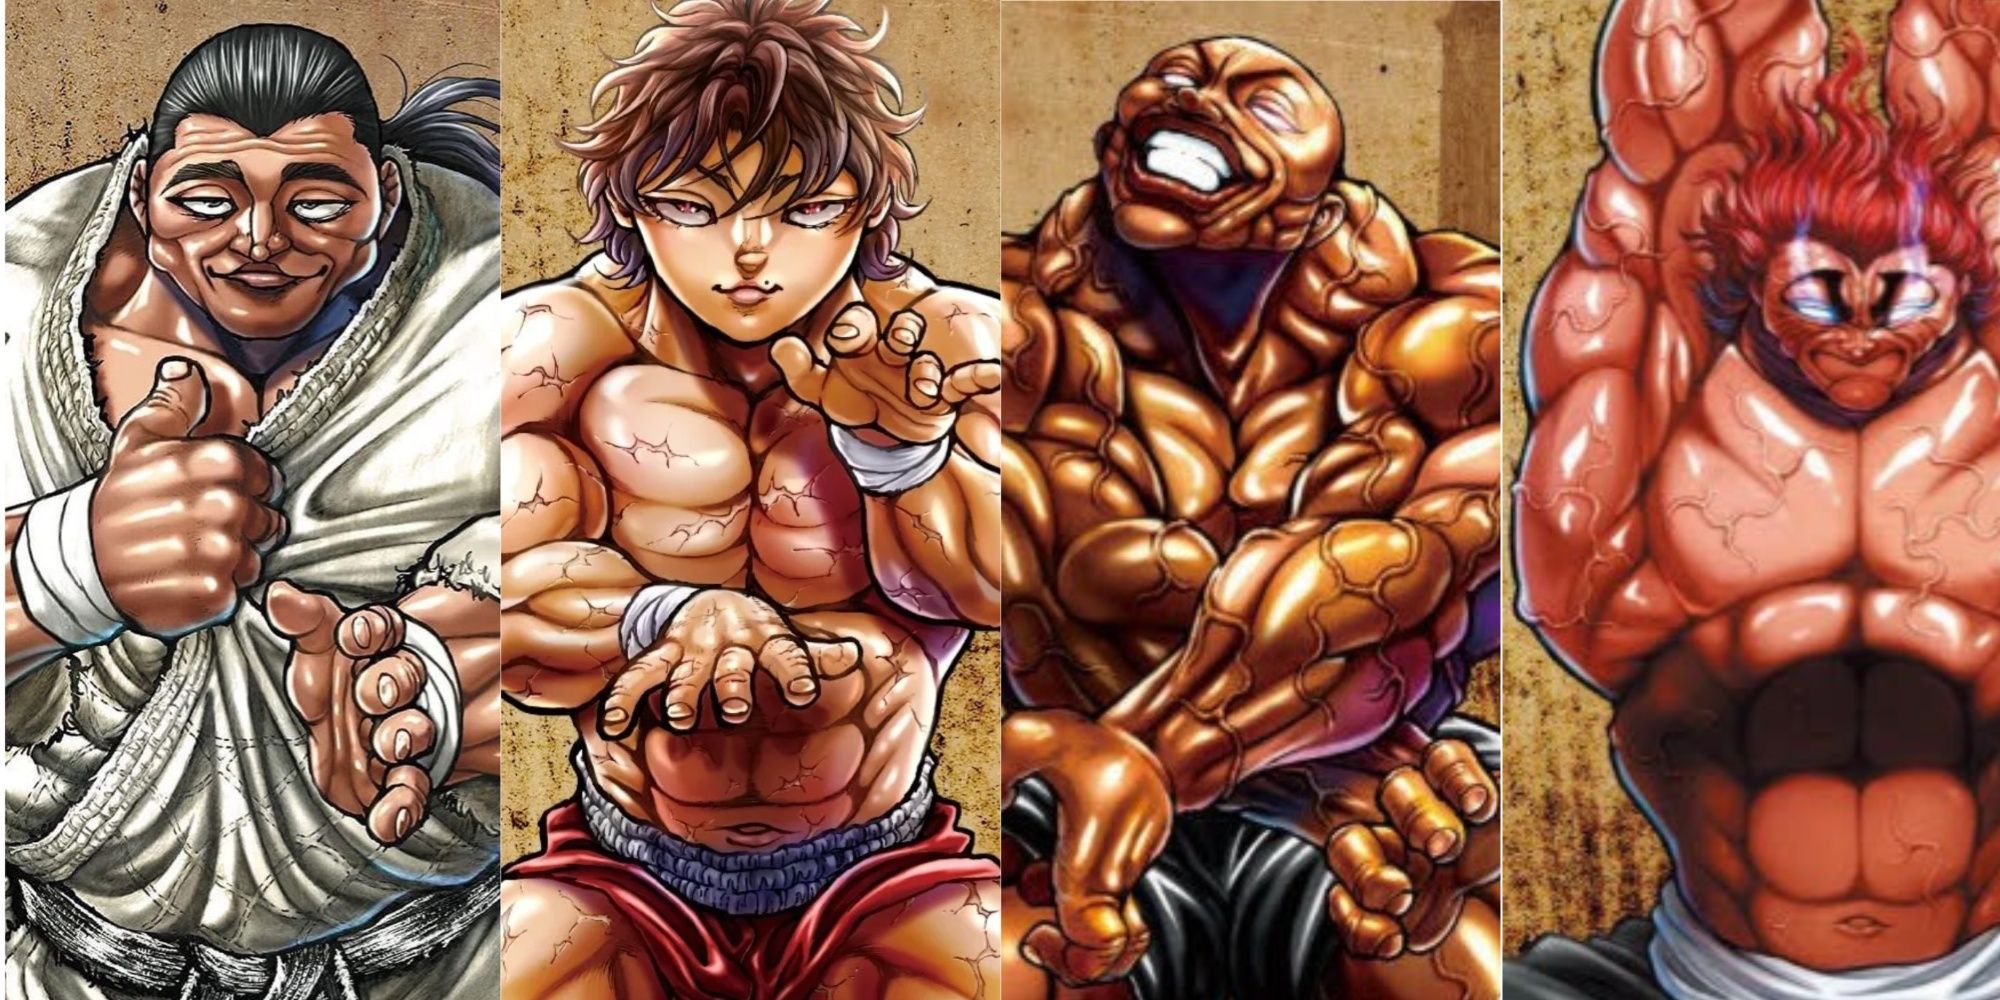 What's the difference between Baki and Baki Hanma? 